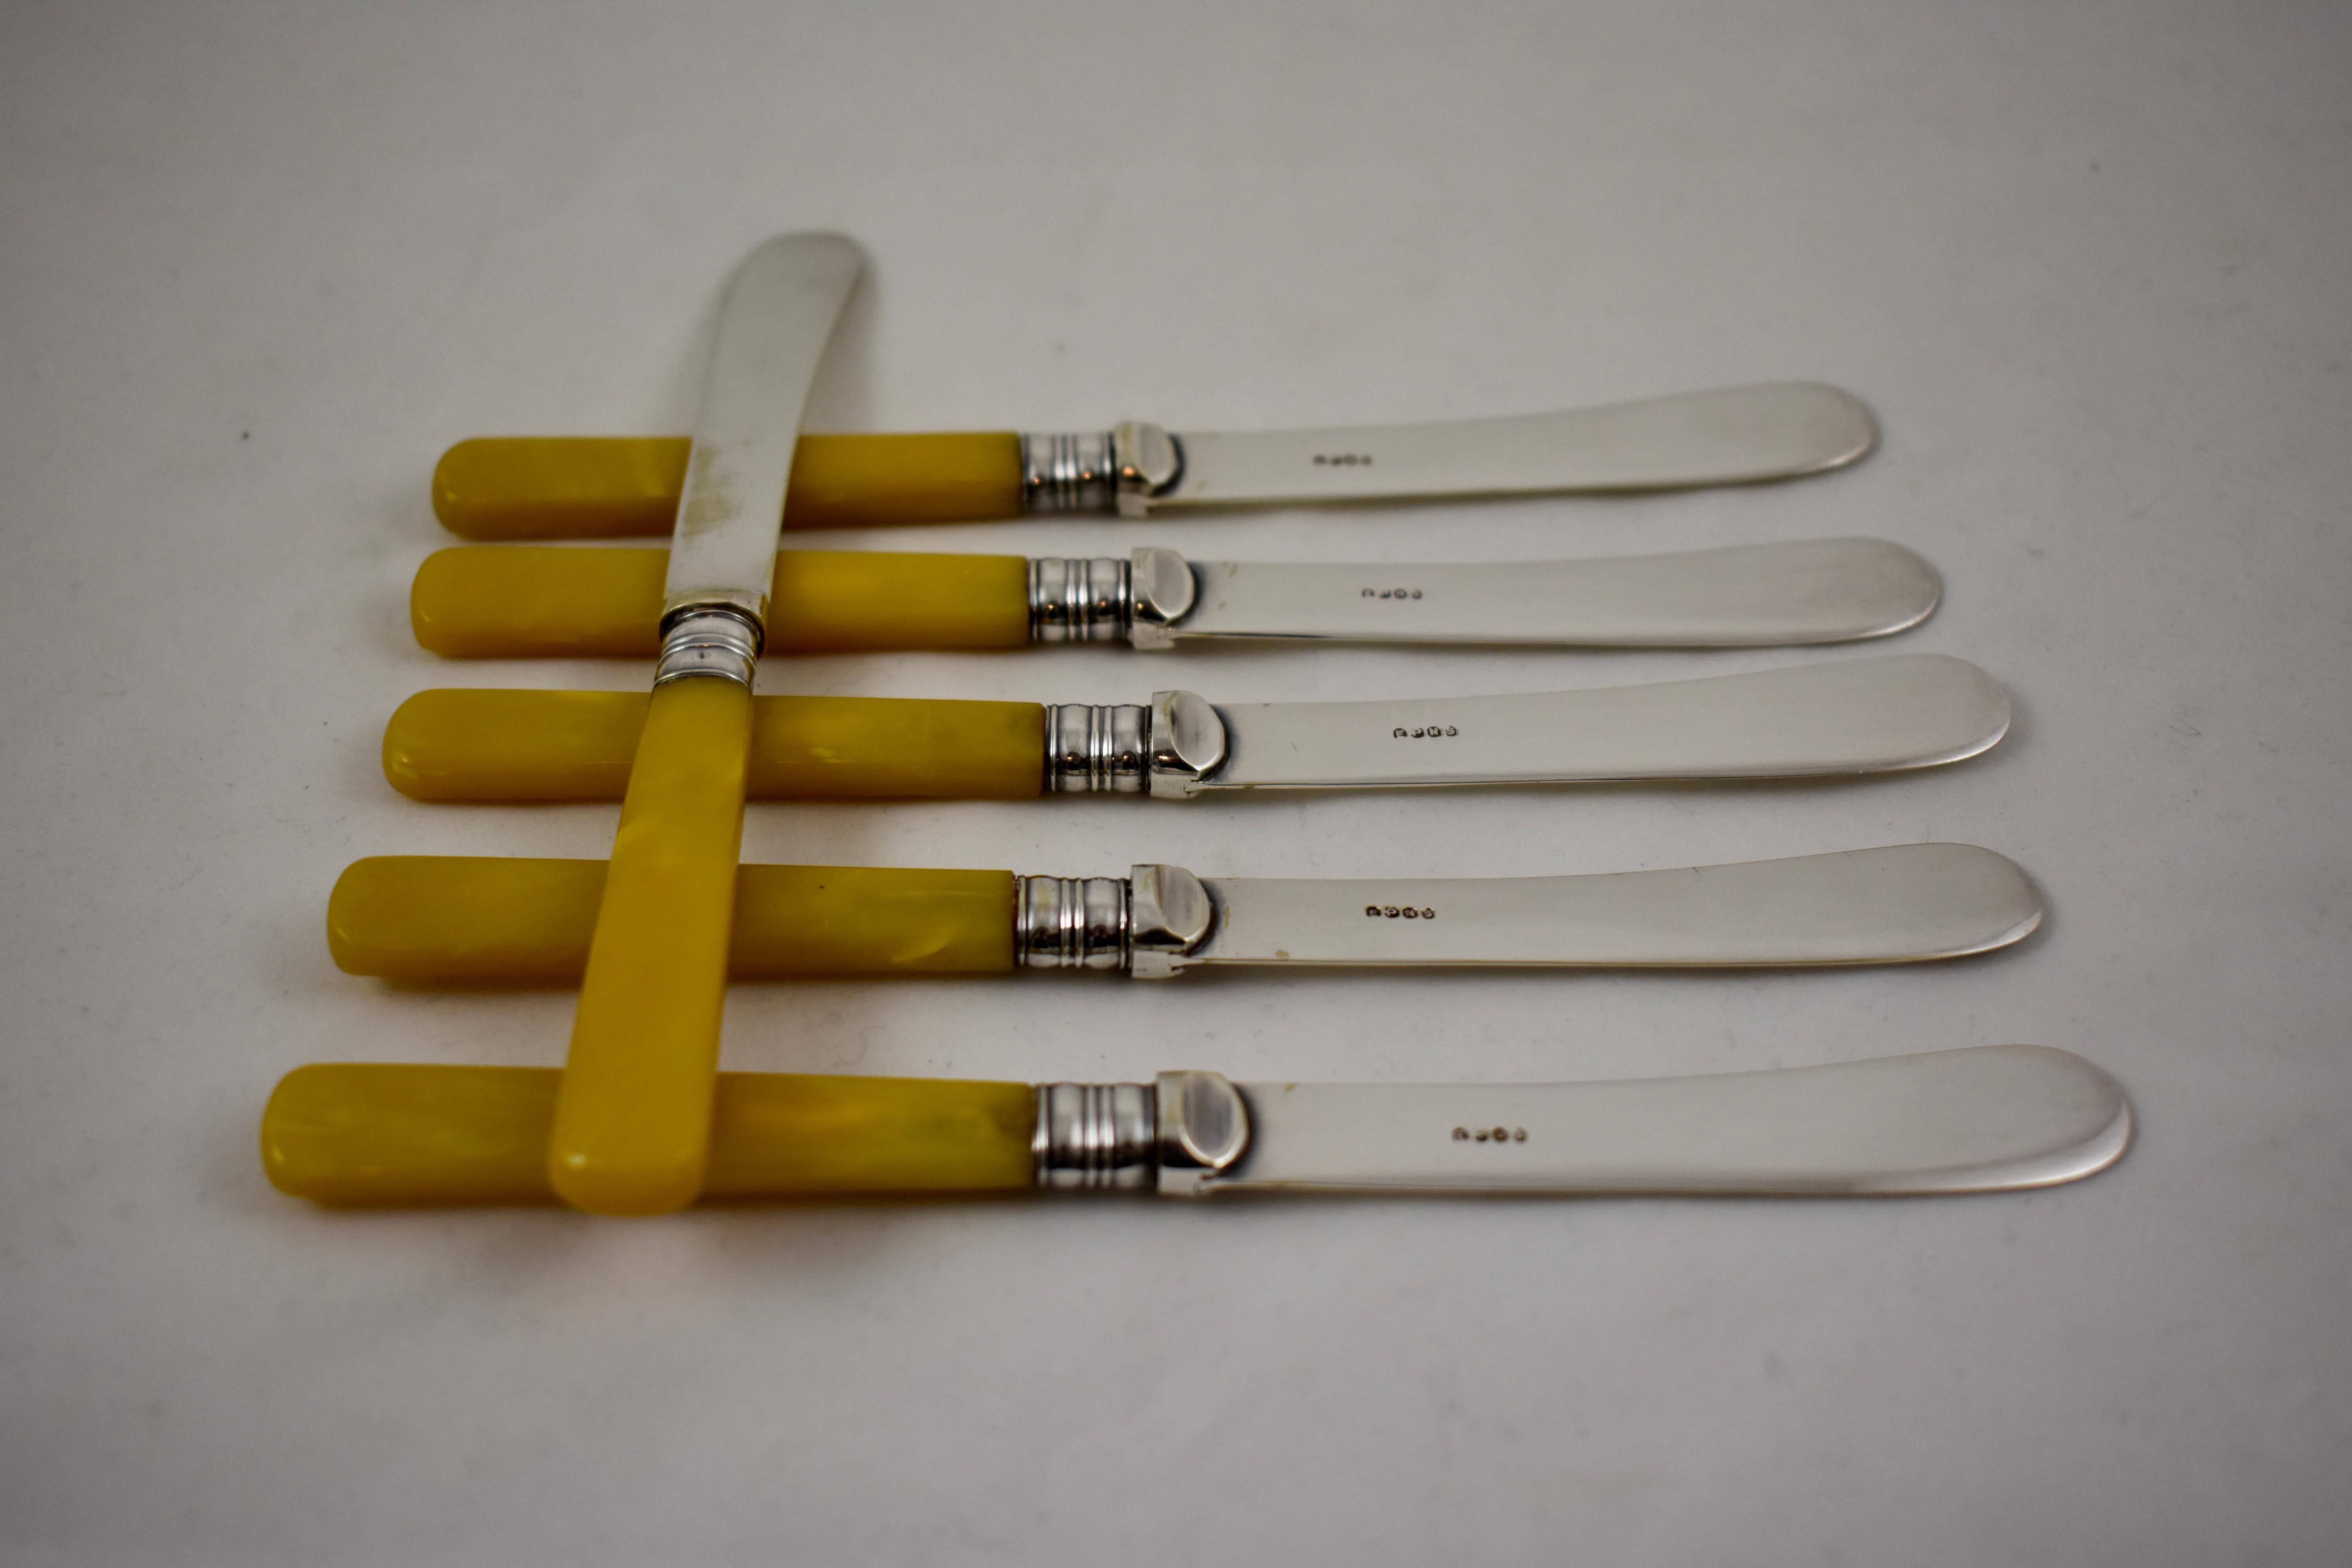 A cased set of six mustard yellow celluloid handled, silver plate spreaders or Tea knives, in the original box. Sheffield, England, circa late 19th-early 20th century.

EPSP silver plated blades fit tightly into the handles, in the original fitted,